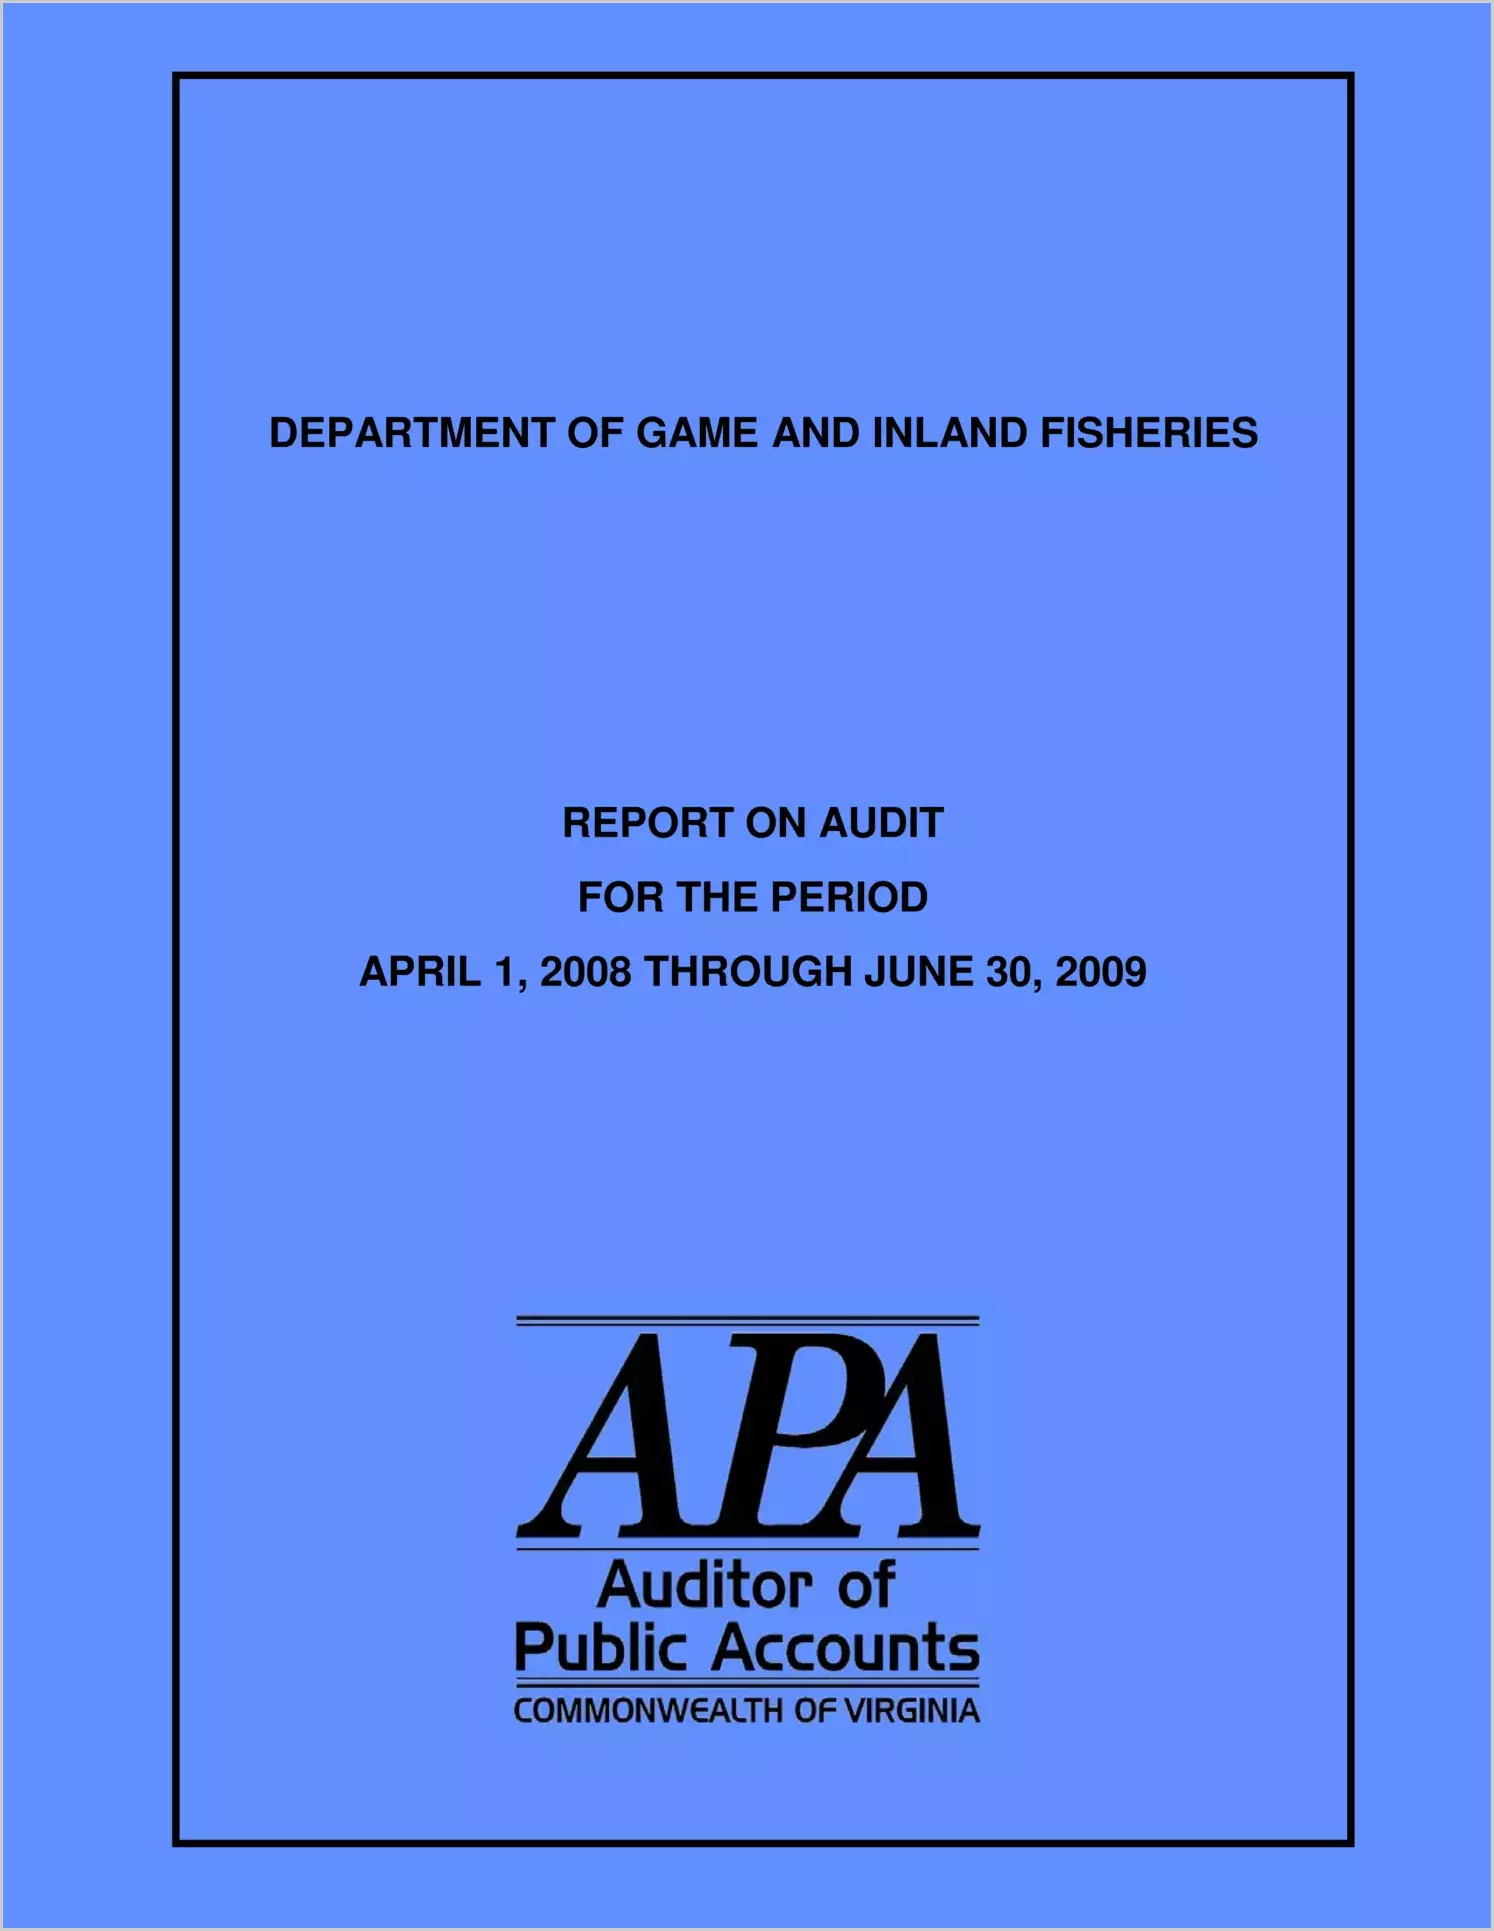 Department of Game and Inland Fisheries Report on Audit for the period April 1, 2008 through June 30, 2009